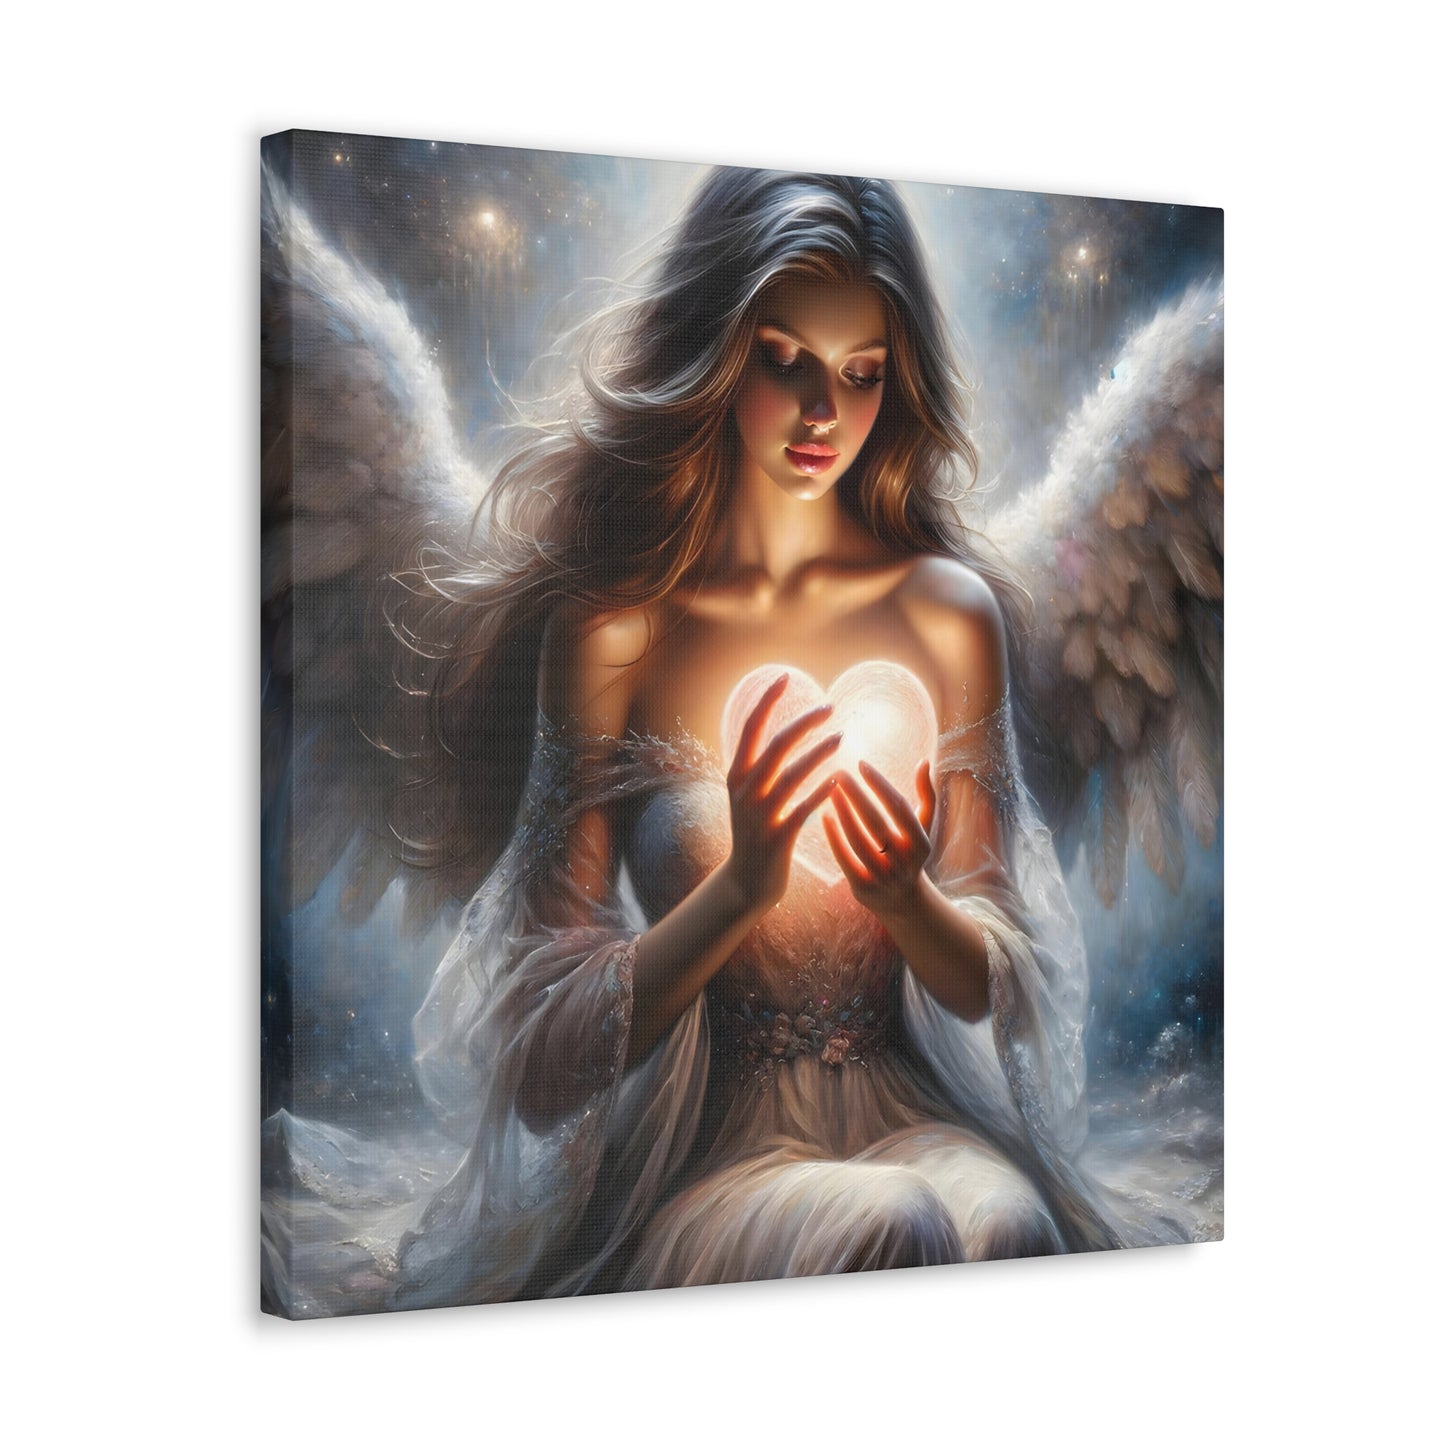 anglke 3 Celestial Embrace' canvas wall art by Aurora, featuring an angelic being cradling a glowing heart to symbolize the purity and passion of love. The artwork is rich in ethereal details and luminescent tones, creating a serene yet powerful ambiance, ideal for those who love heavenly-inspired decor with a romantic touch.